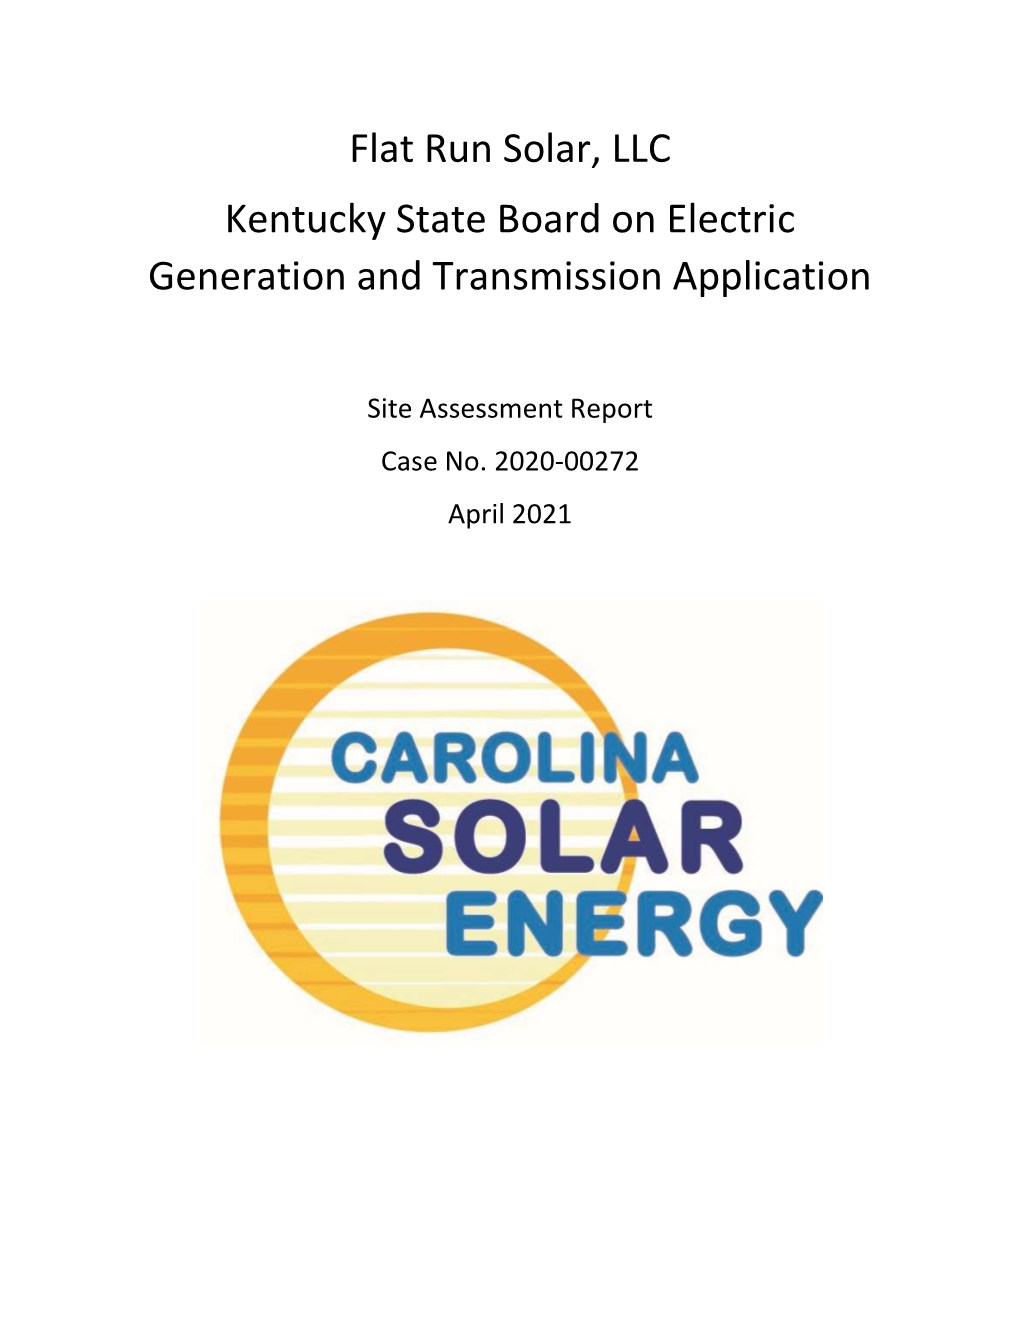 Flat Run Solar, LLC Kentucky State Board on Electric Generation and Transmission Application